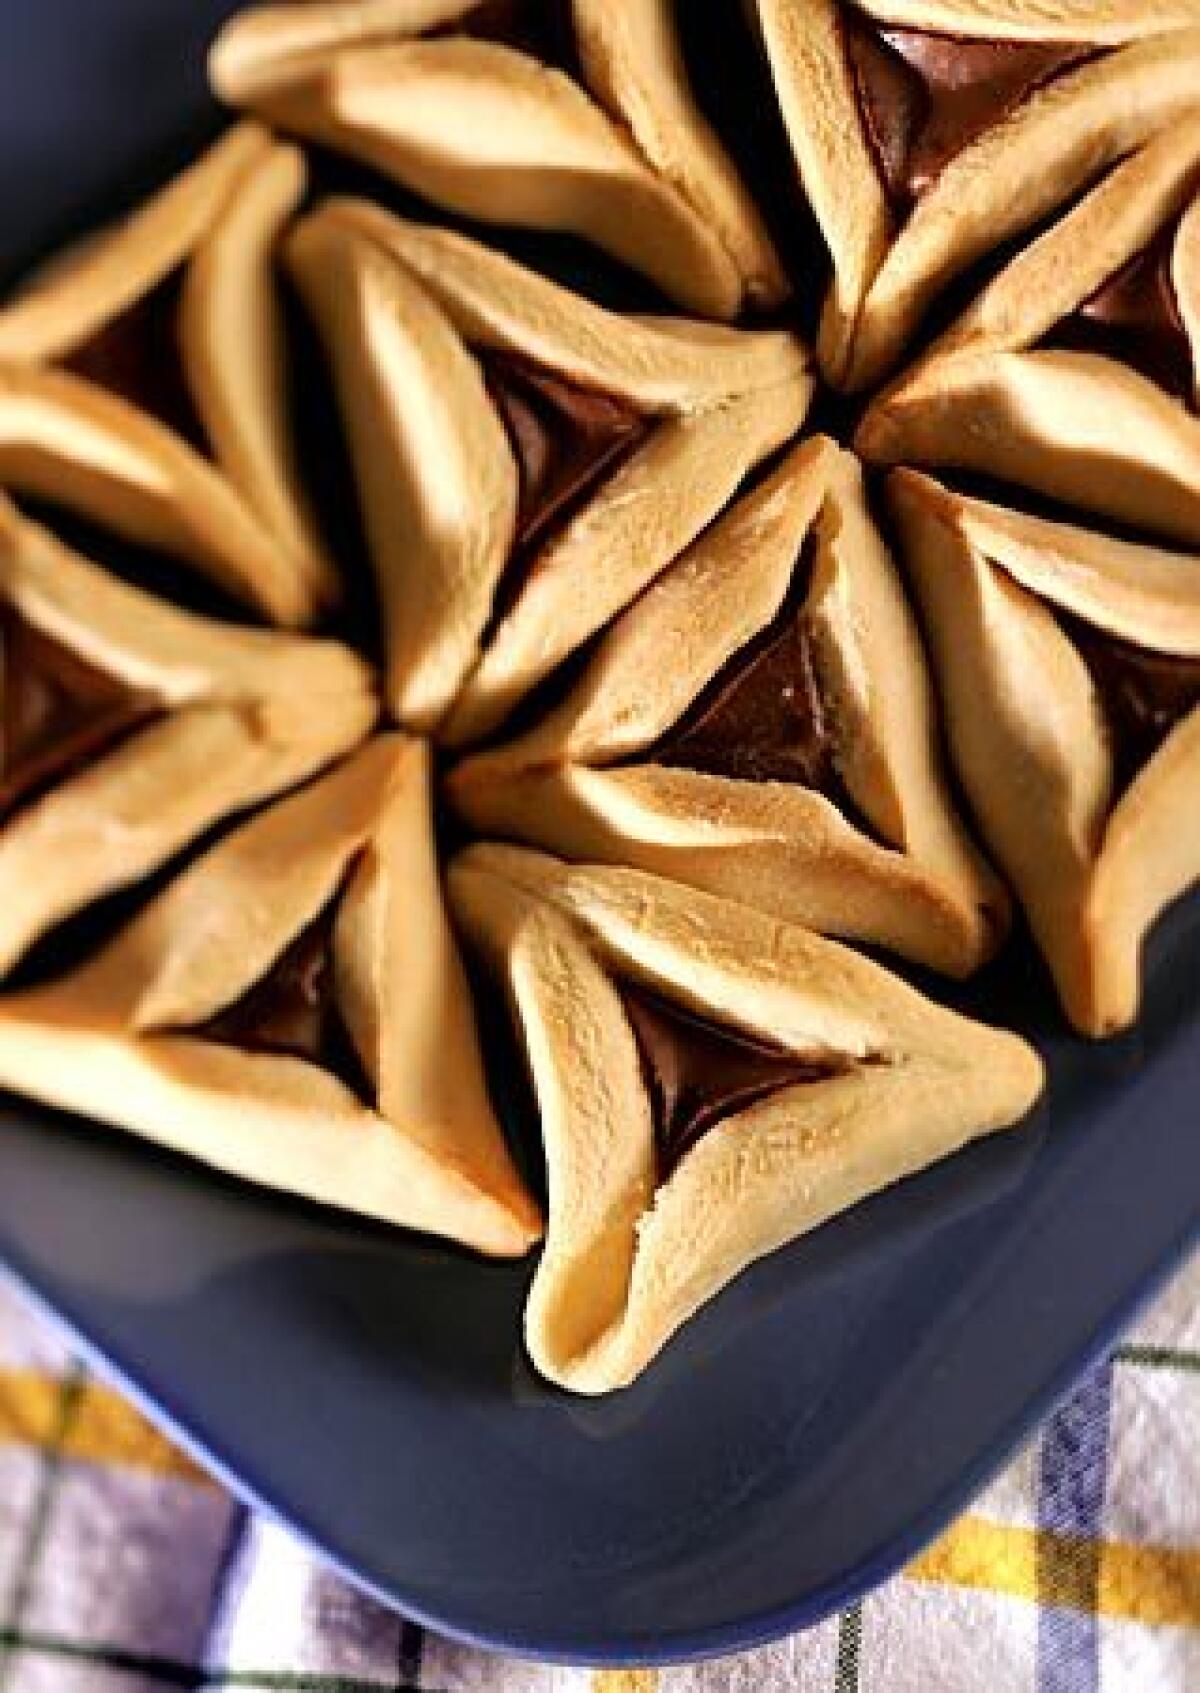 One of the most important customs of the Jewish festival of Purim is giving the gift of food, such as cookies filled with Nutella.